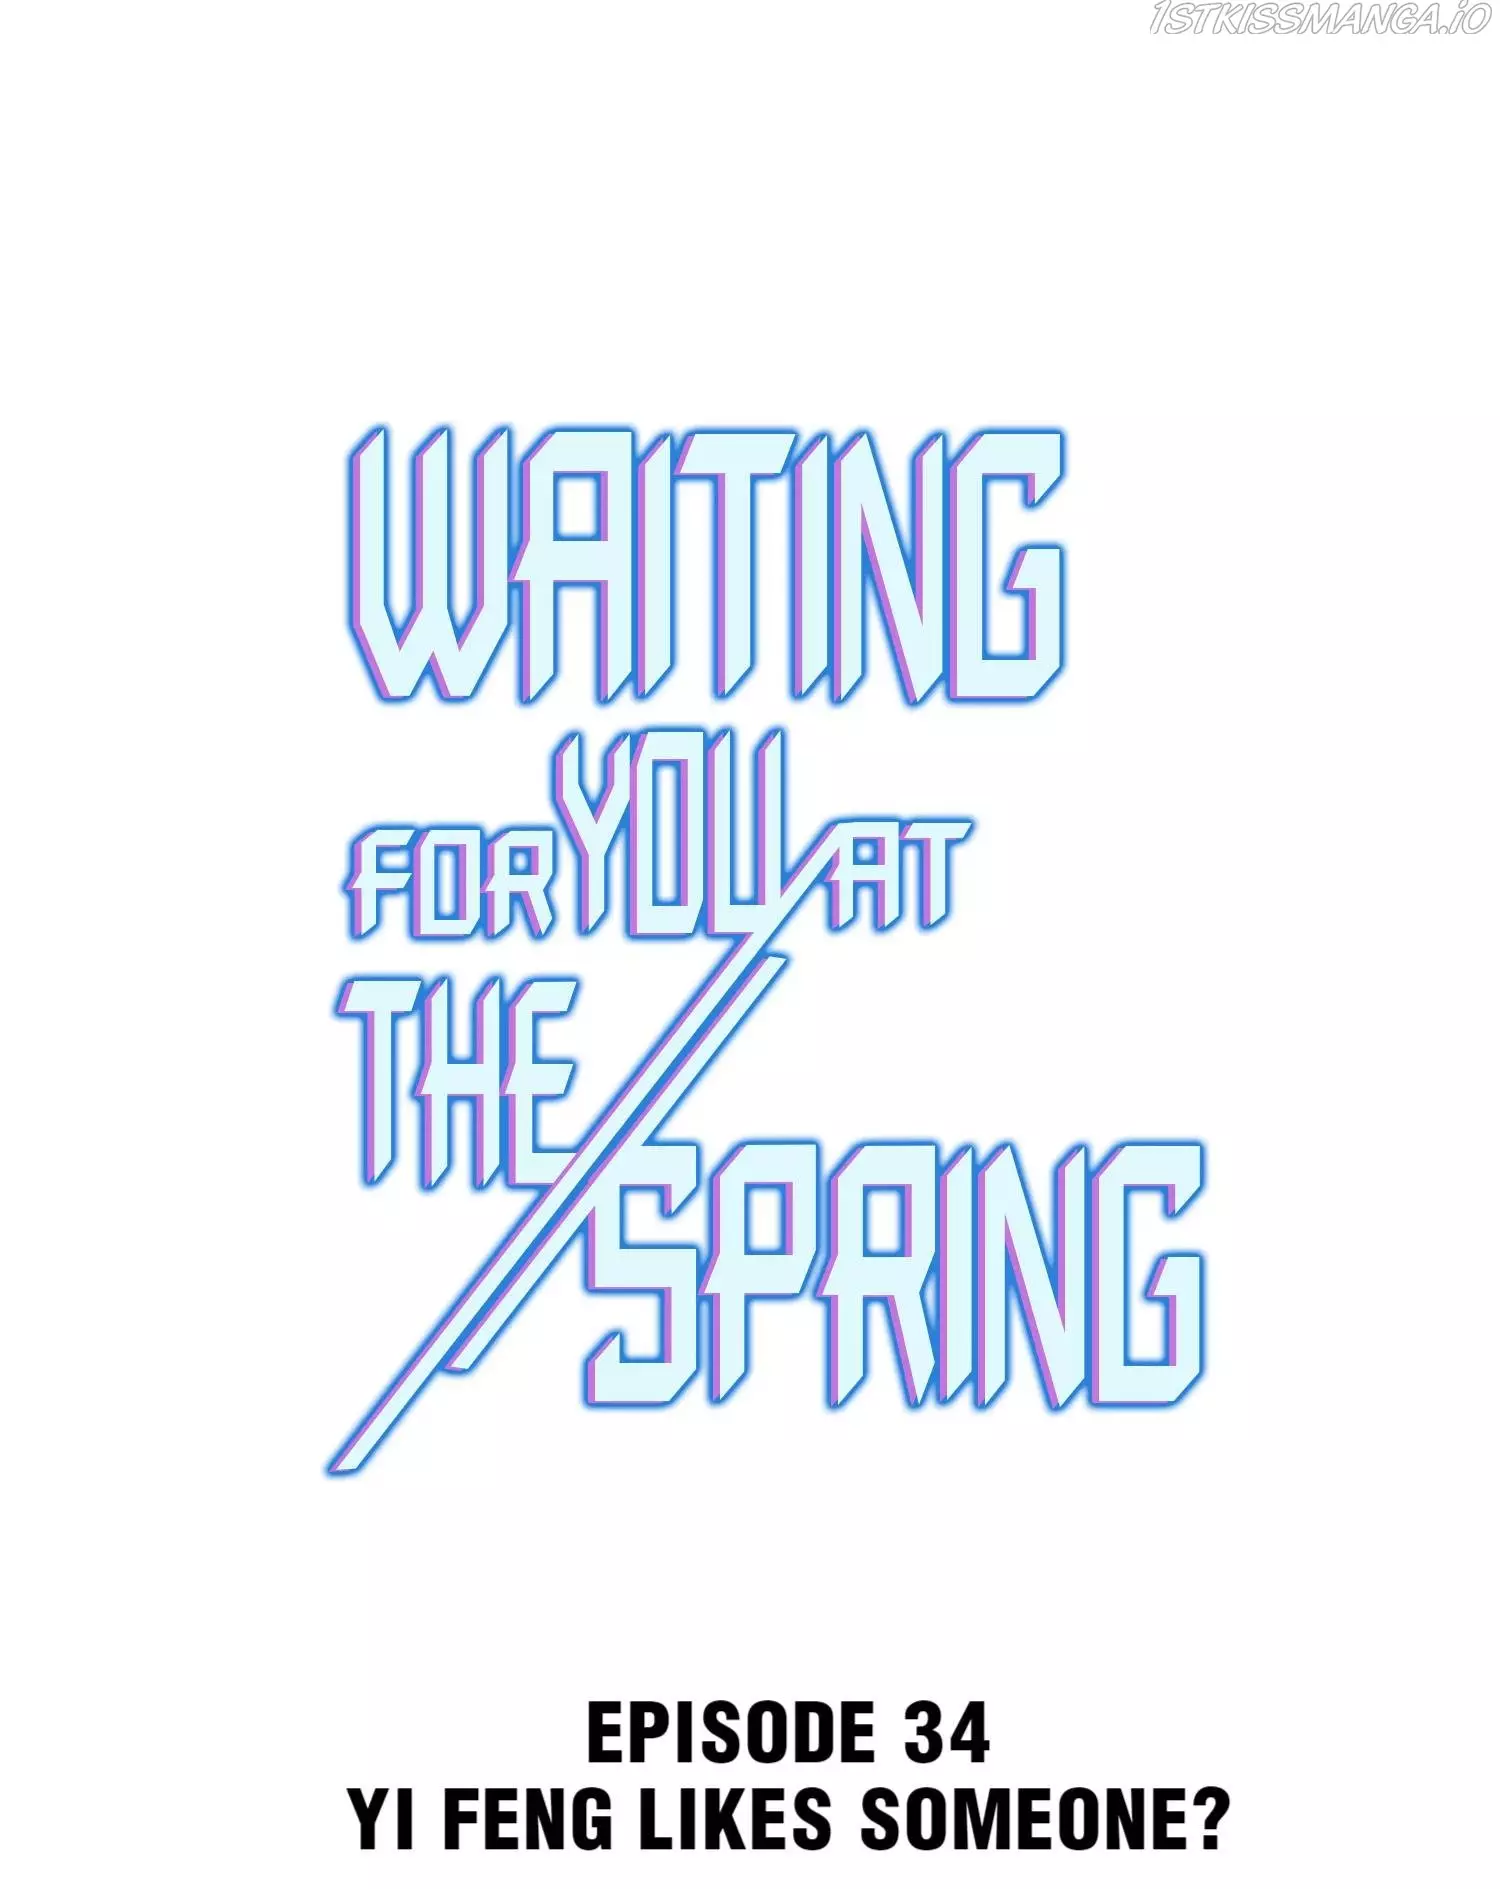 Waiting For You At The Spring - 34 page 1-5abe46c3